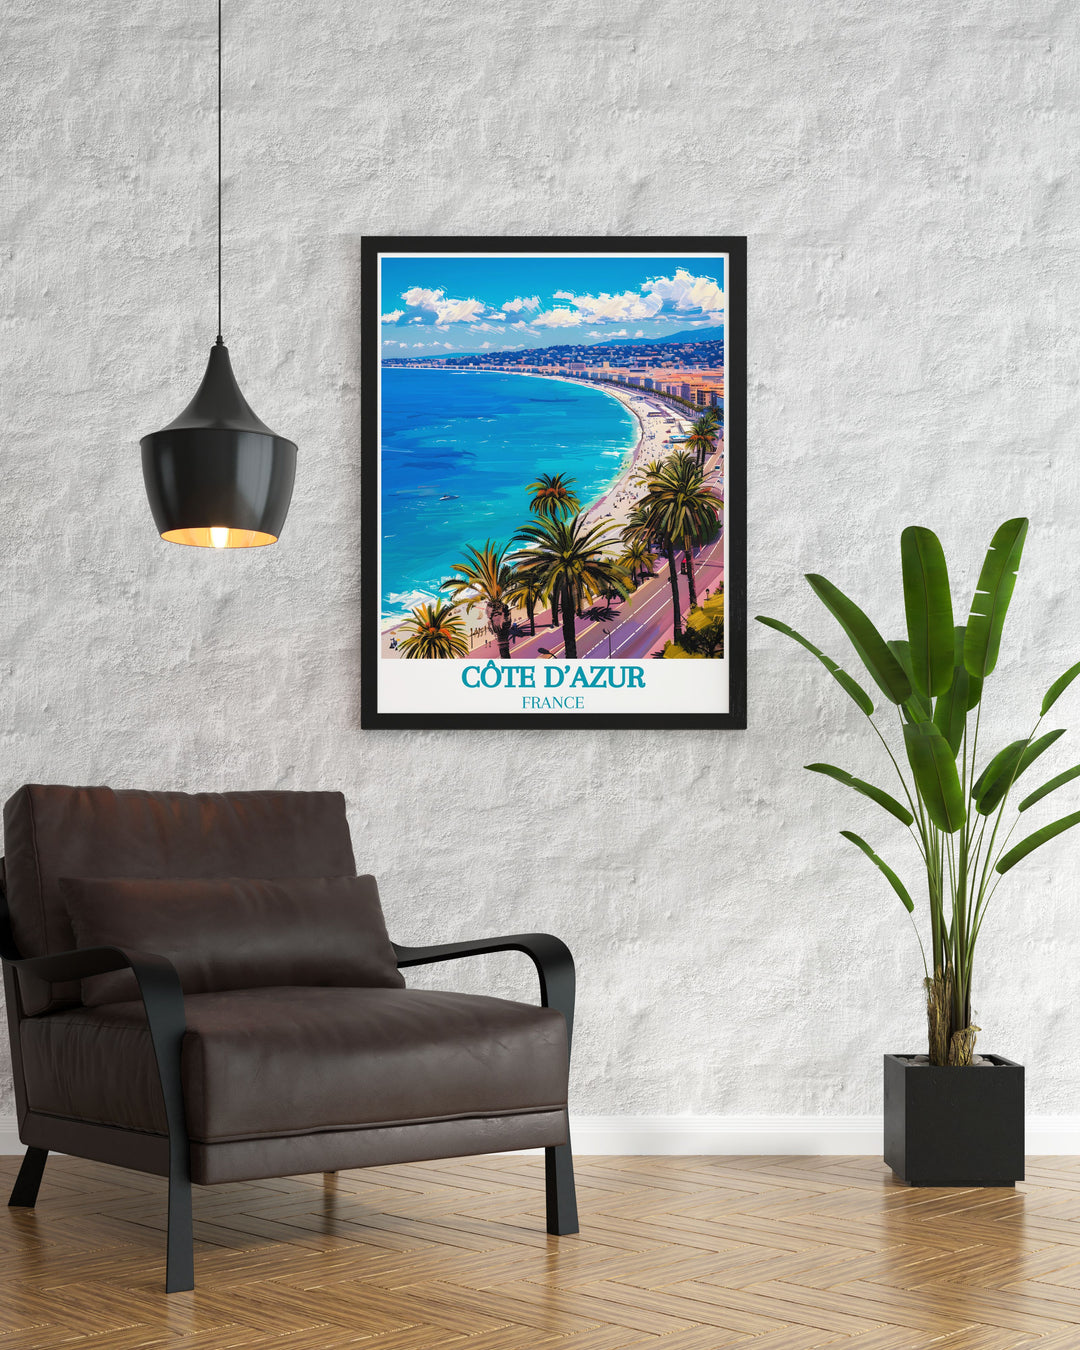 Custom print of the Promenade des Anglais, Nice, Côte dAzur, France, offering a personalized touch to your home decor. This artwork highlights the picturesque boulevard, vibrant street life, and serene Mediterranean views, perfect for those who love coastal landscapes.